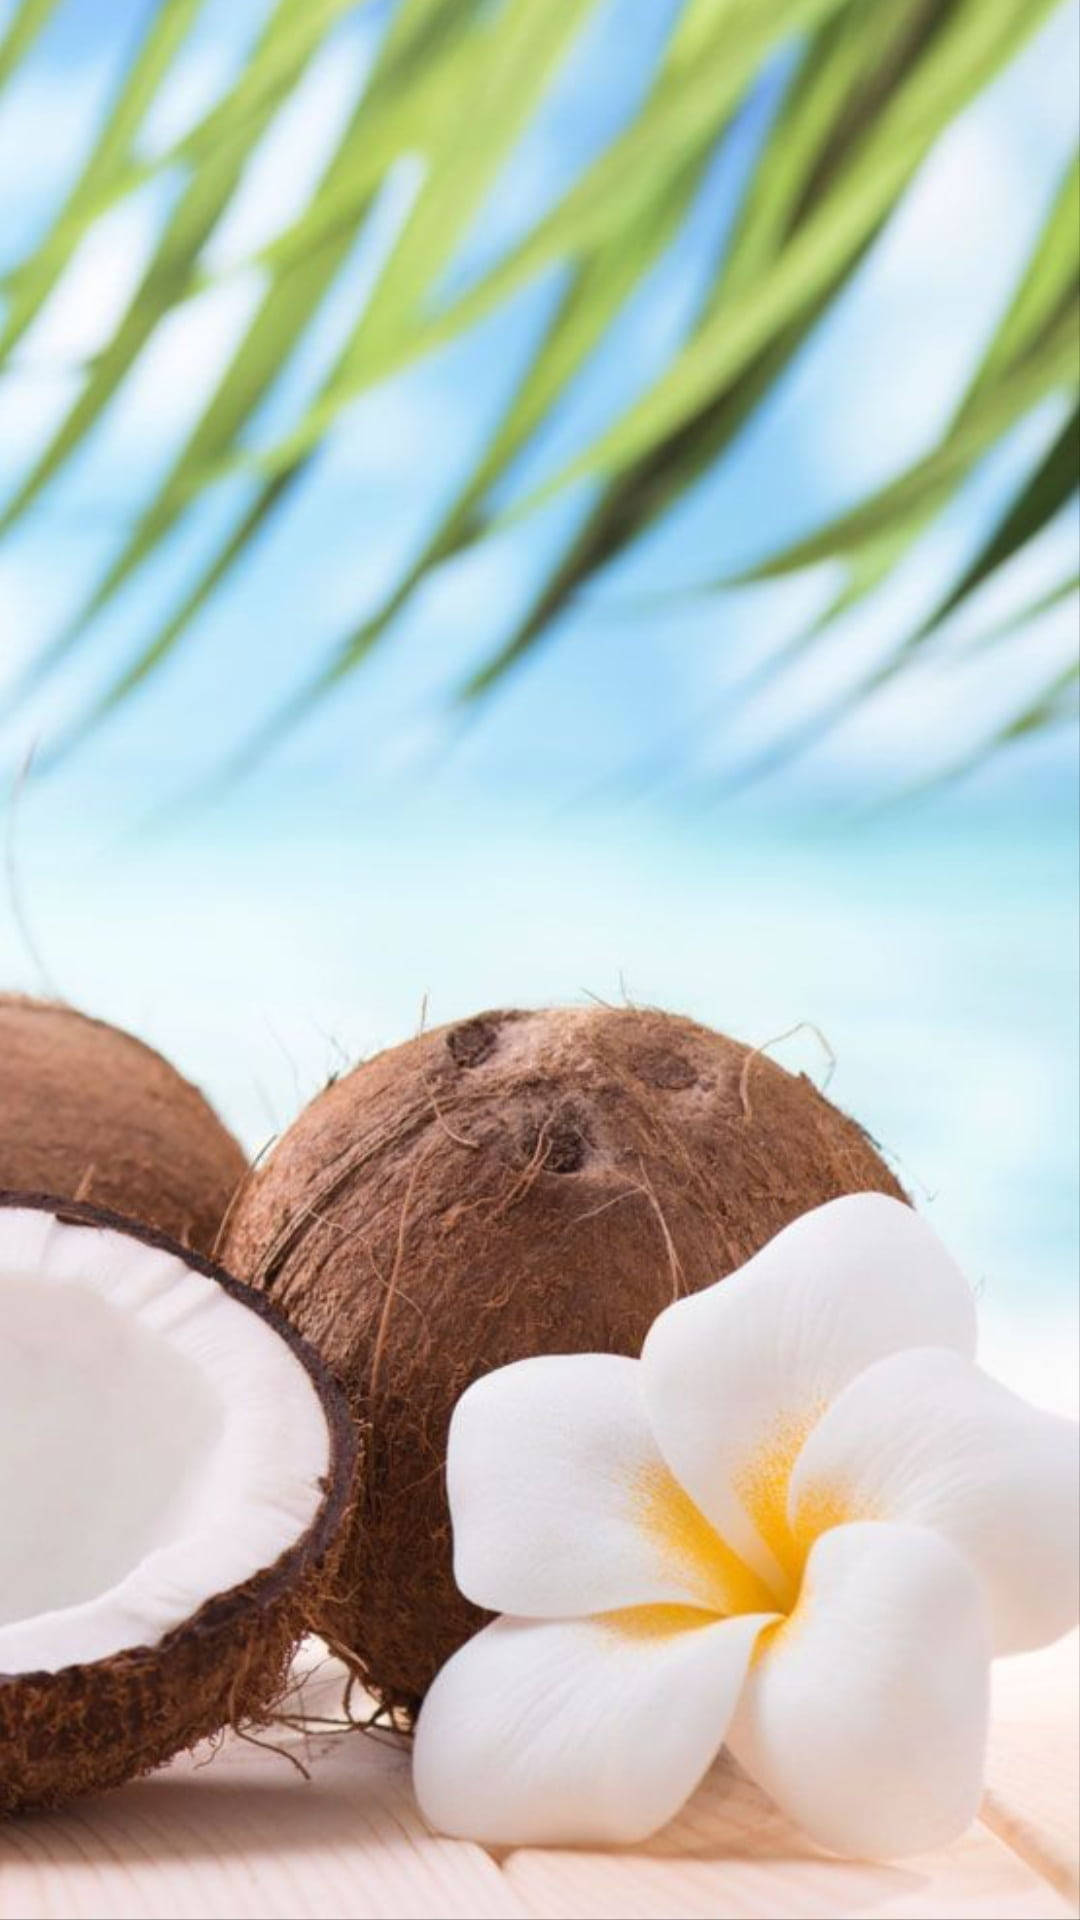 Coconut Fruits With White Plumeria Flower Picture